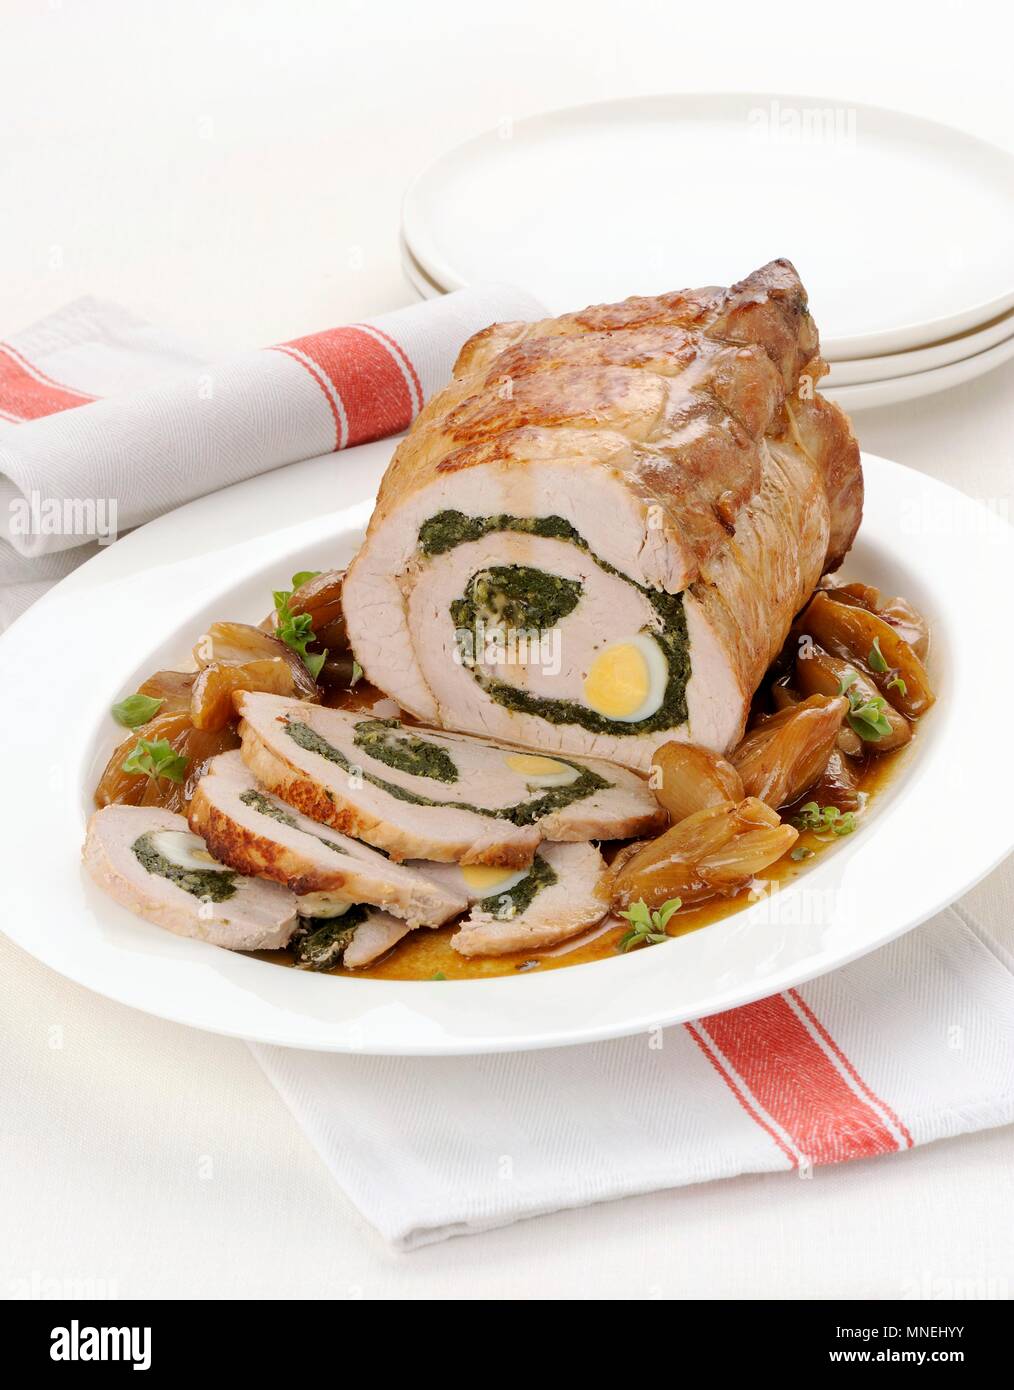 Pork roulade filled with herbs and eggs Stock Photo